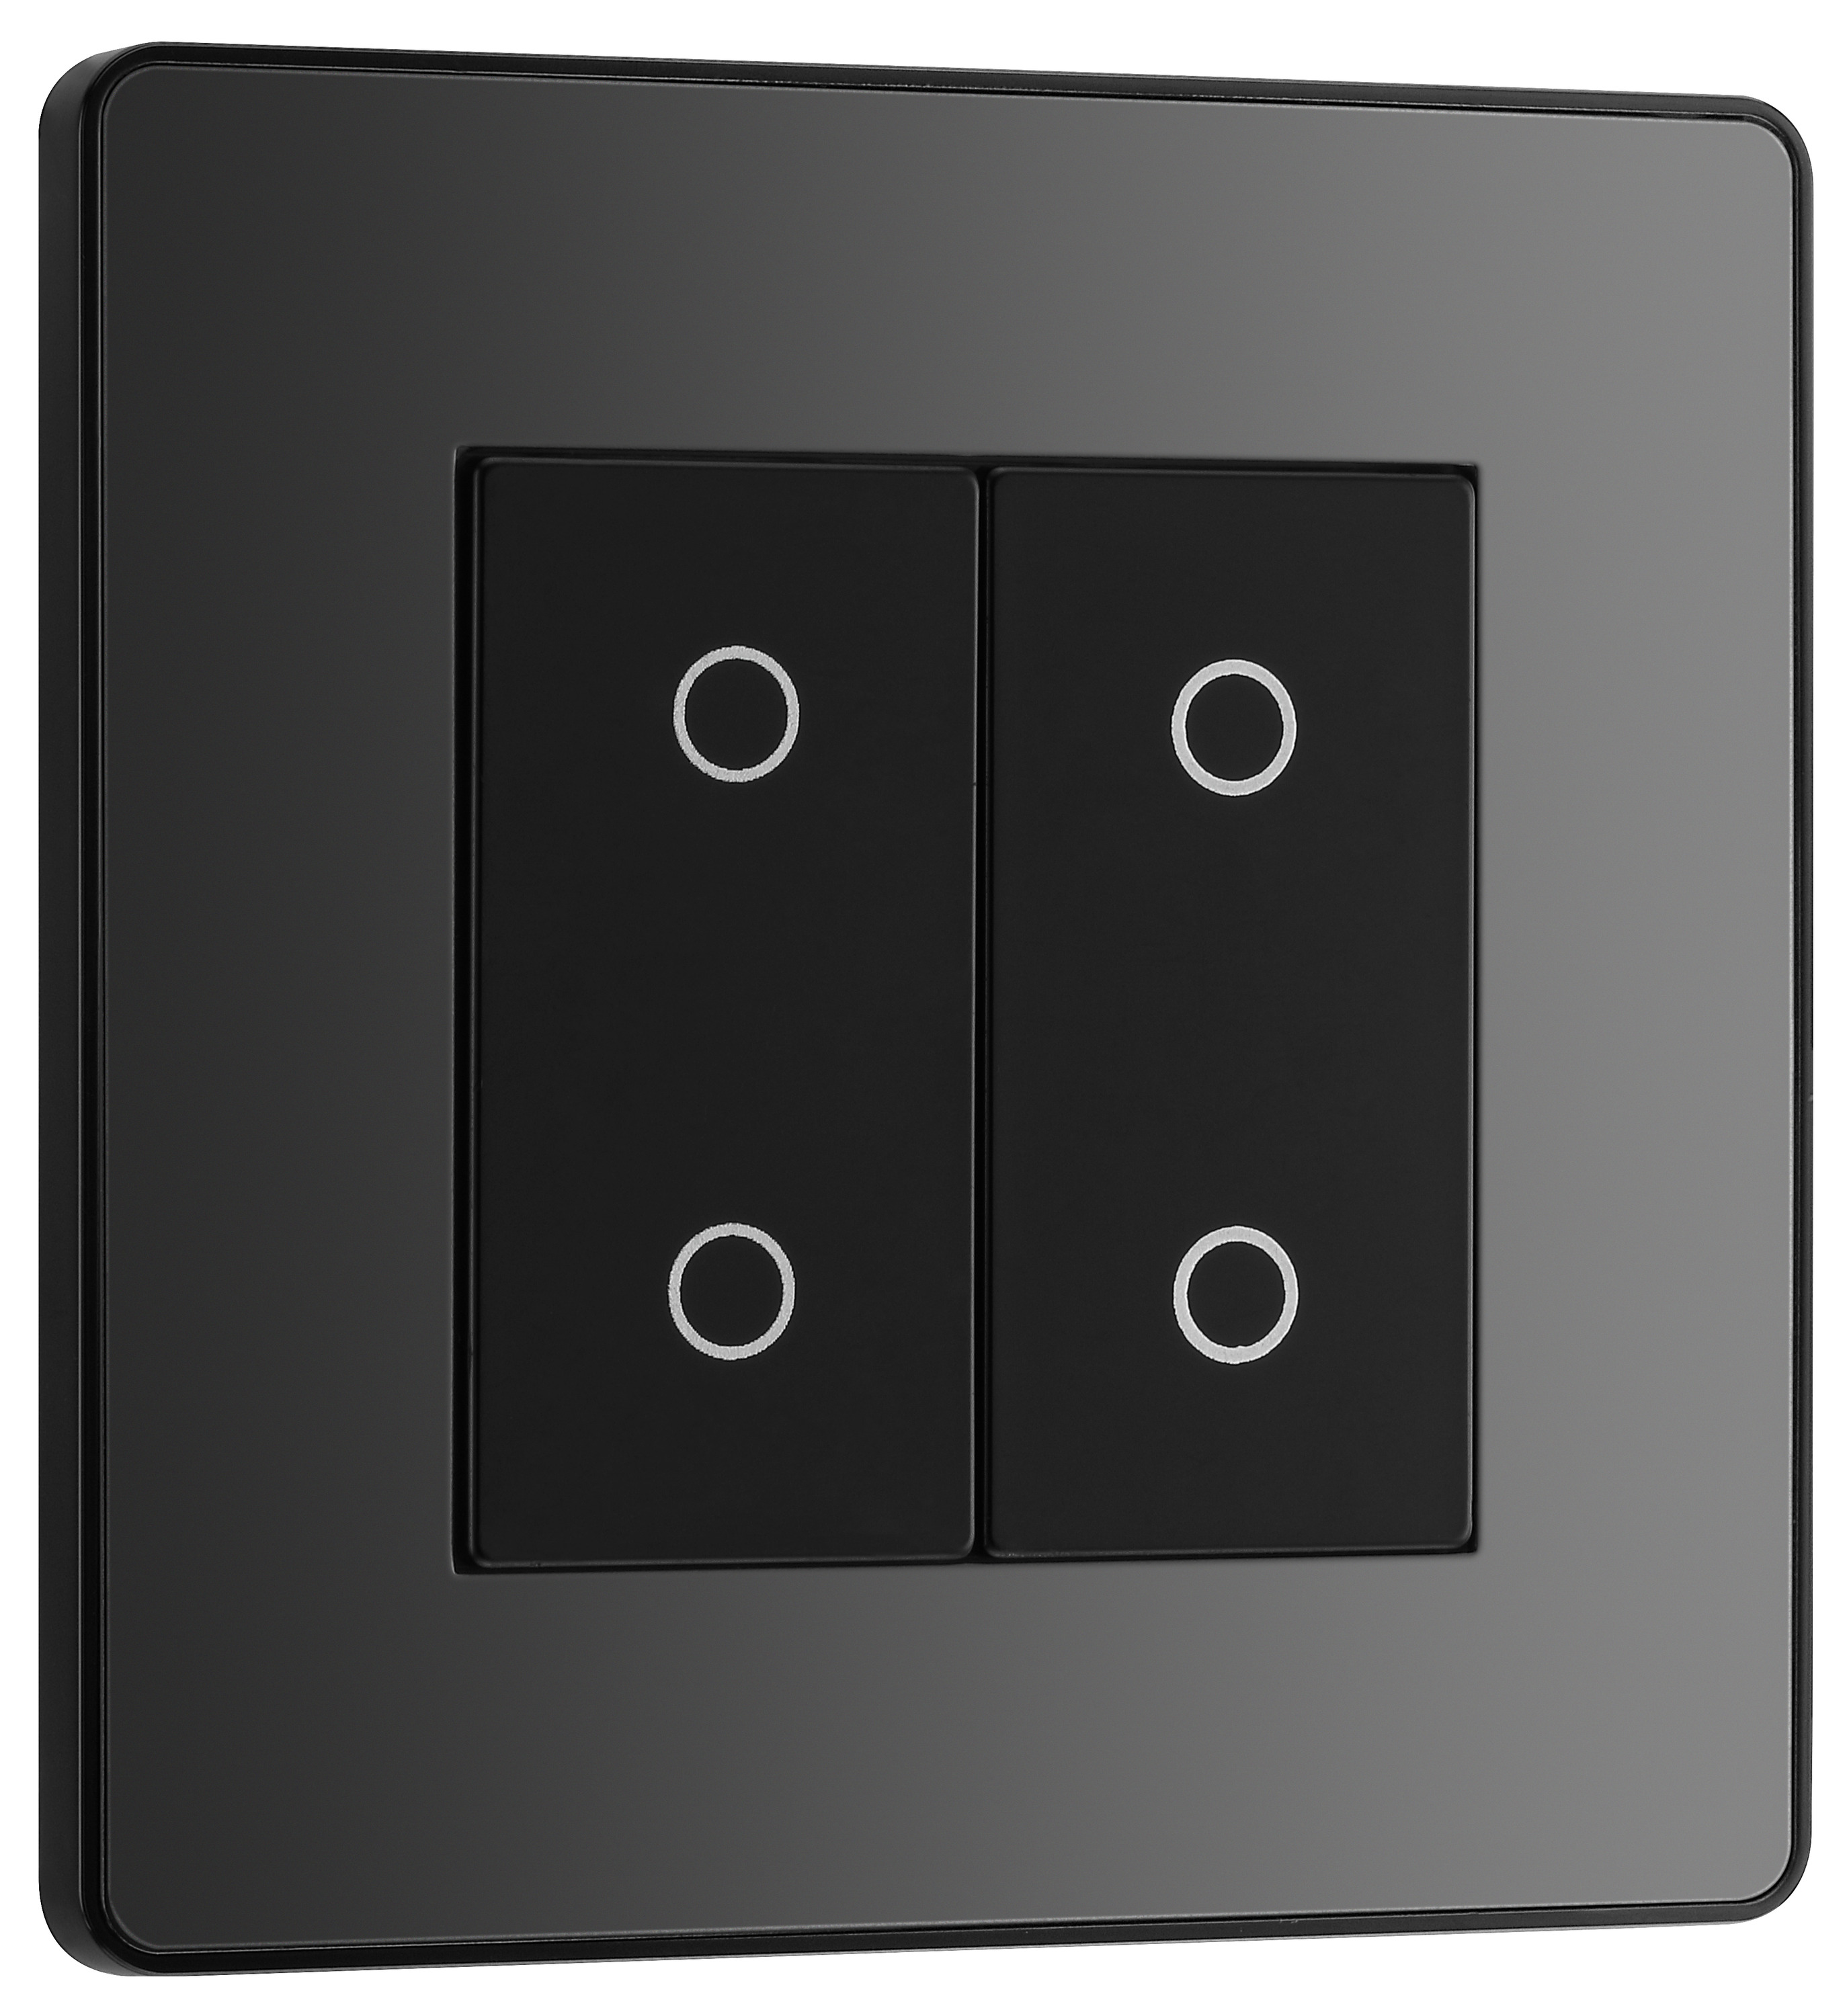 BG Evolve Master Black Chrome 2 Way Double Touch Dimmer Switch - 200W